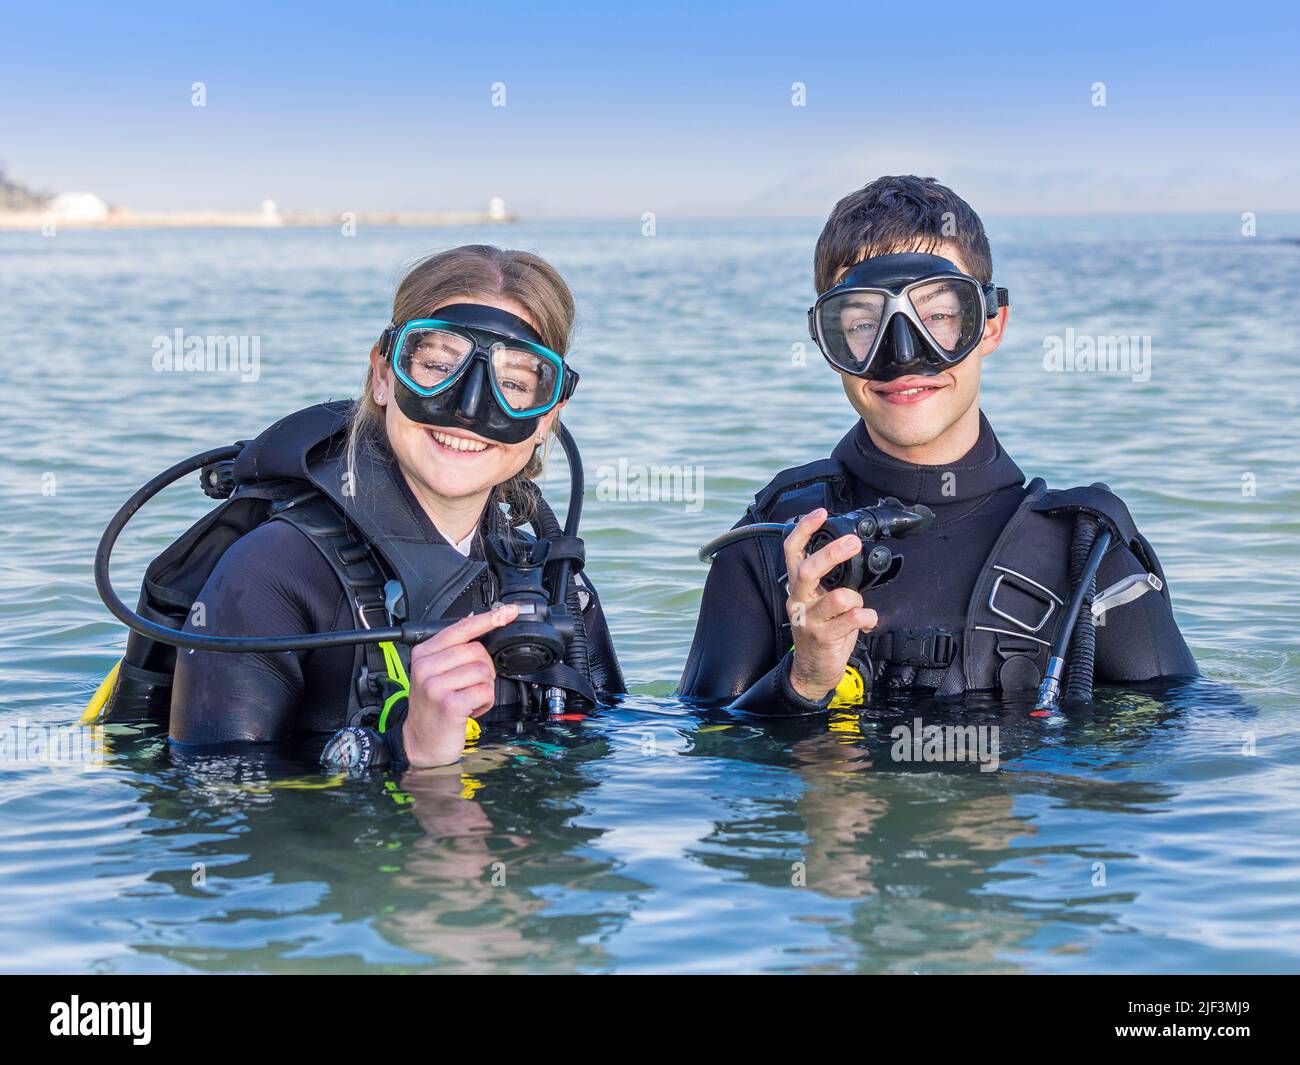 Smiling scuba divers in the sea, facing the camera with their dive masks on and their regulators in their hands Stock Photo